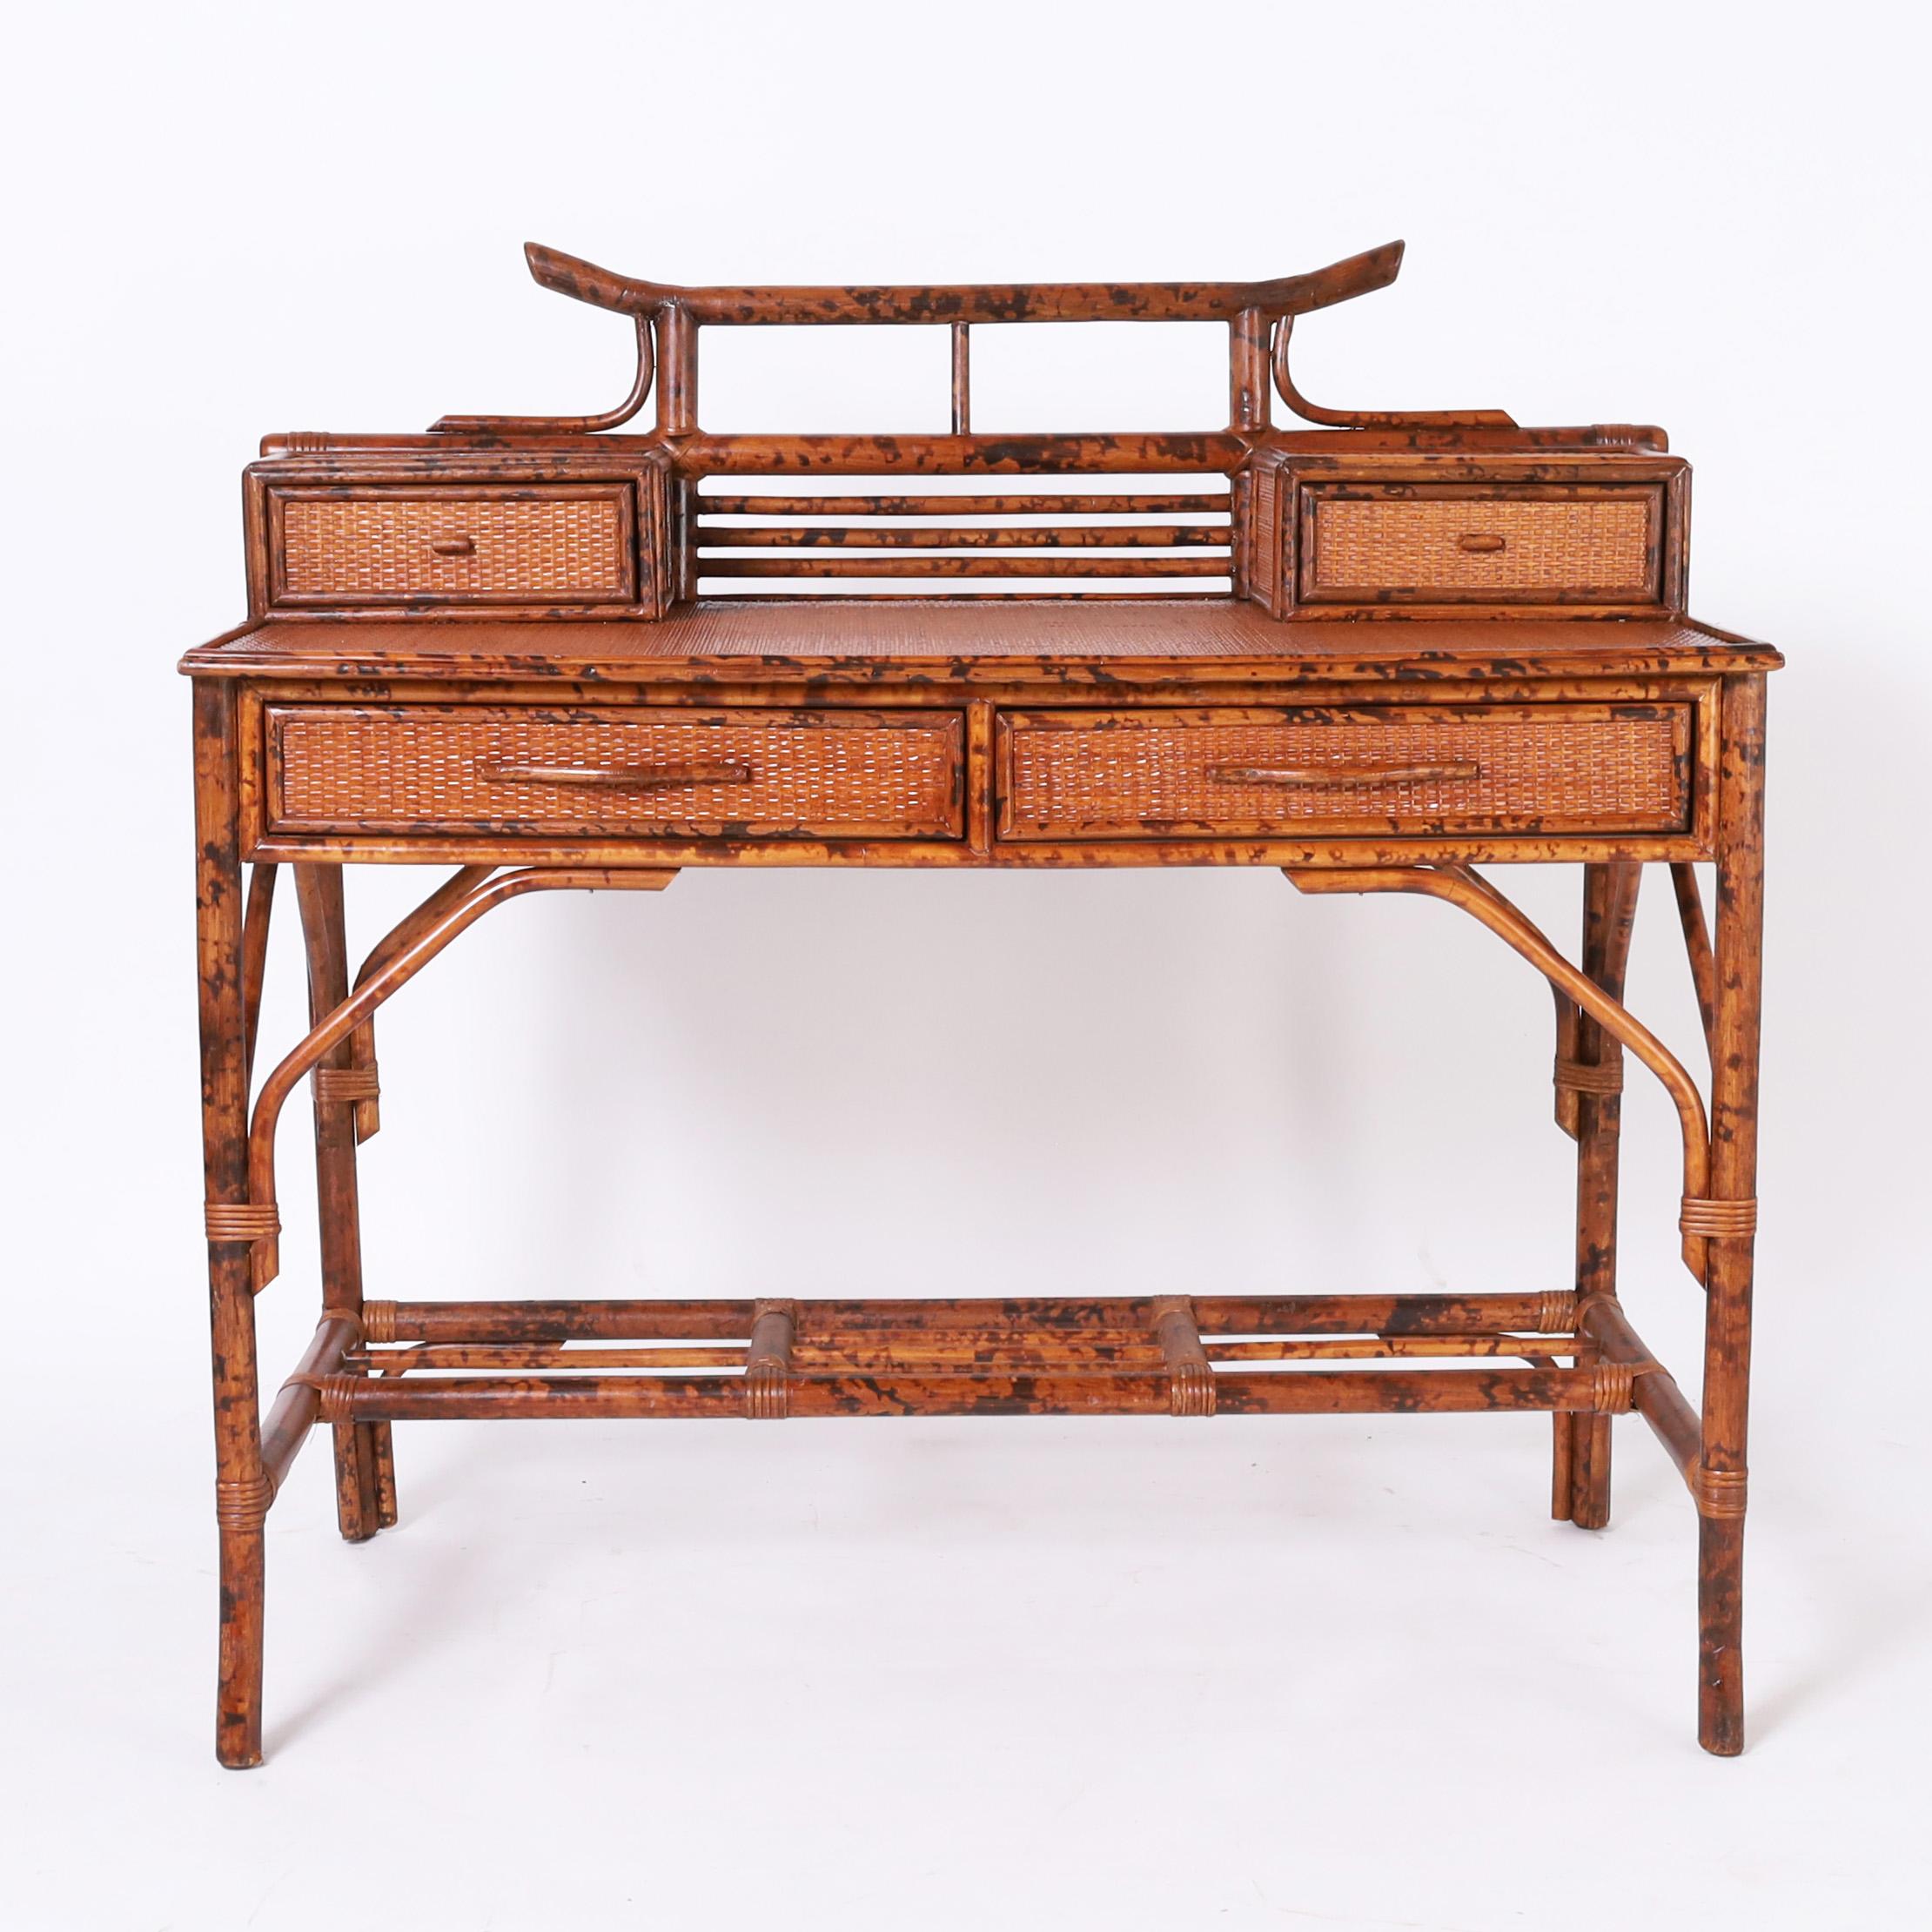 Impressive mid century desk crafted with a faux burnt bamboo frame having grasscloth panels on the tops, sides, and drawer fronts, featuring two glove boxes and a dramatic pagoda form with brackets and splayed feet. 